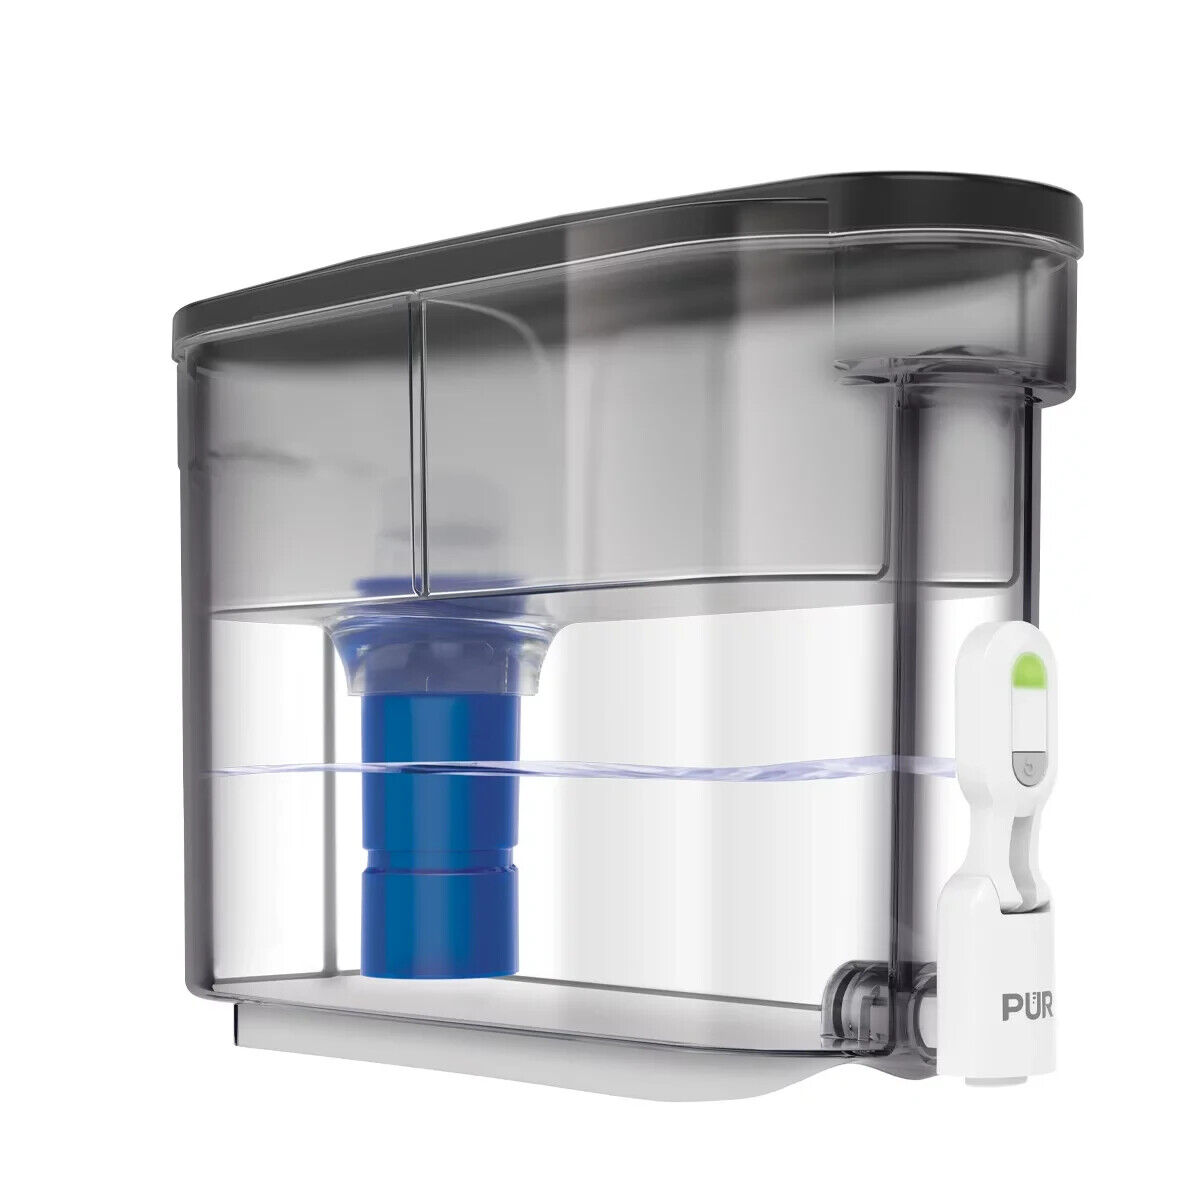 PUR Plus Innovating in Water Filtration 30 Cup Dispenser Filtration System